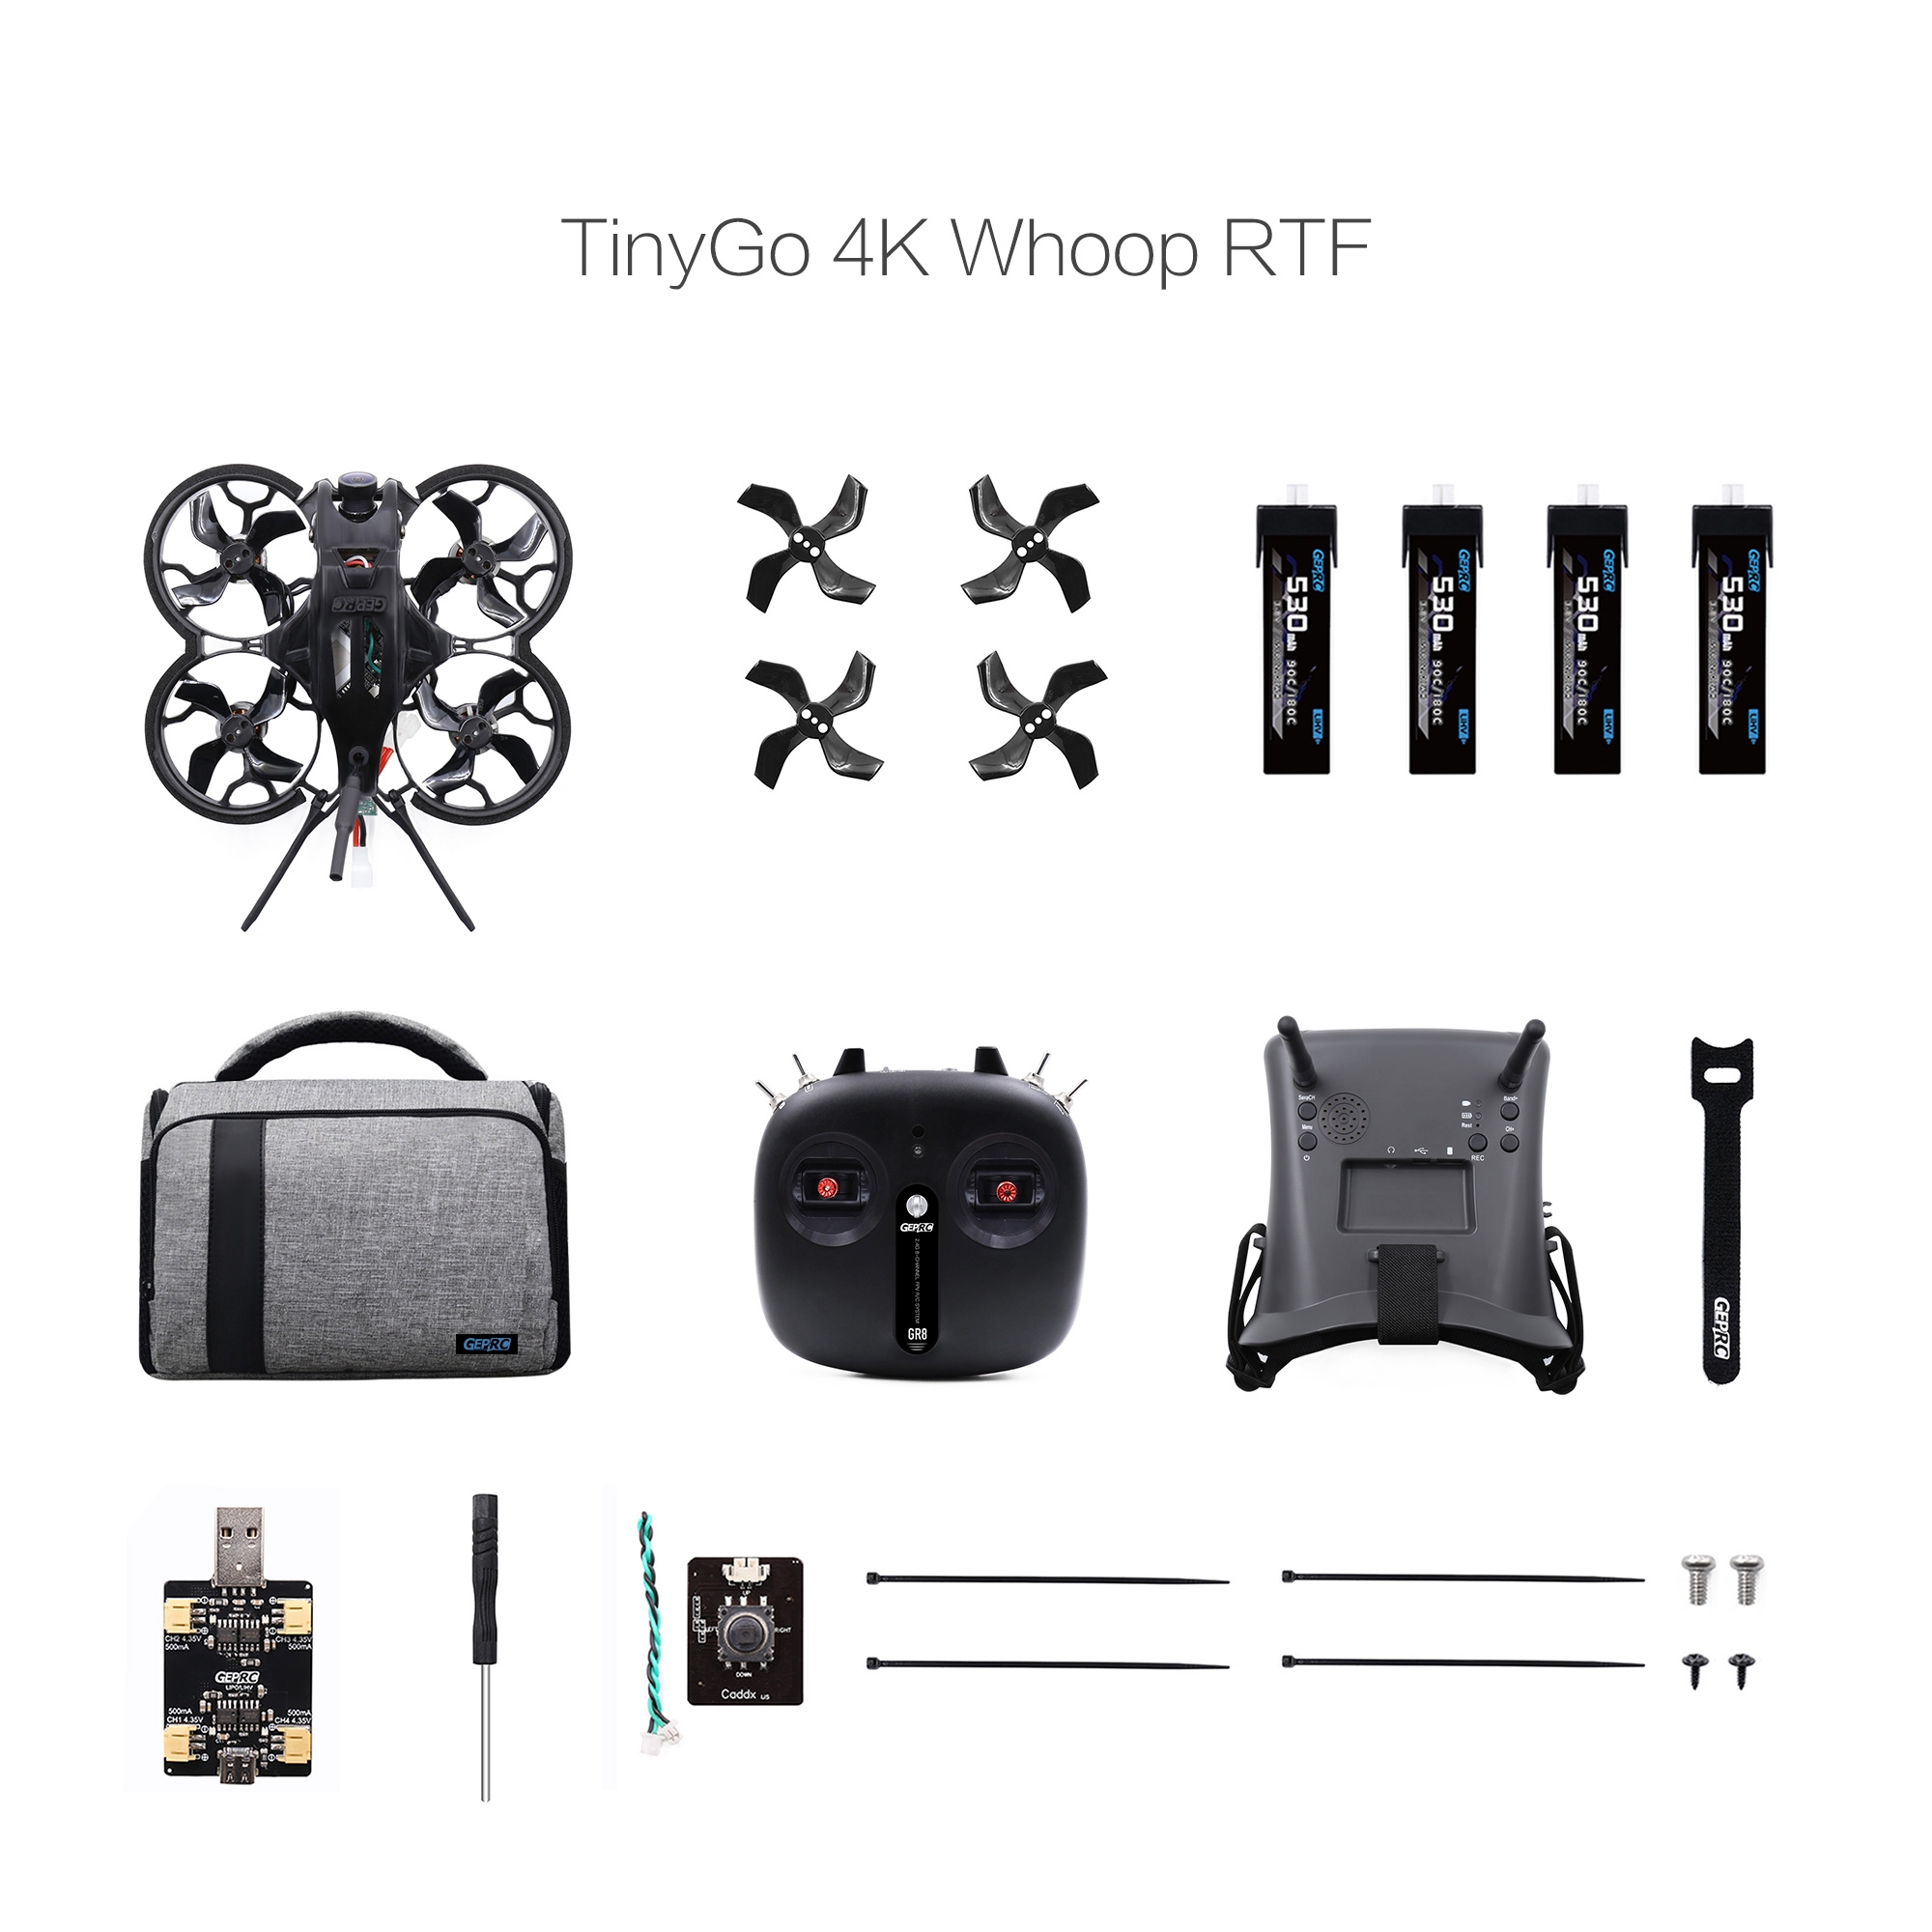 $246.39 for GEPRC TinyGO 1.6inch 2S 4K Caddx Loris FPV Indoor Whoop+GR8 Remote Controller+RG1 Goggles RTF Ready To Fly FPV Racing RC Drone